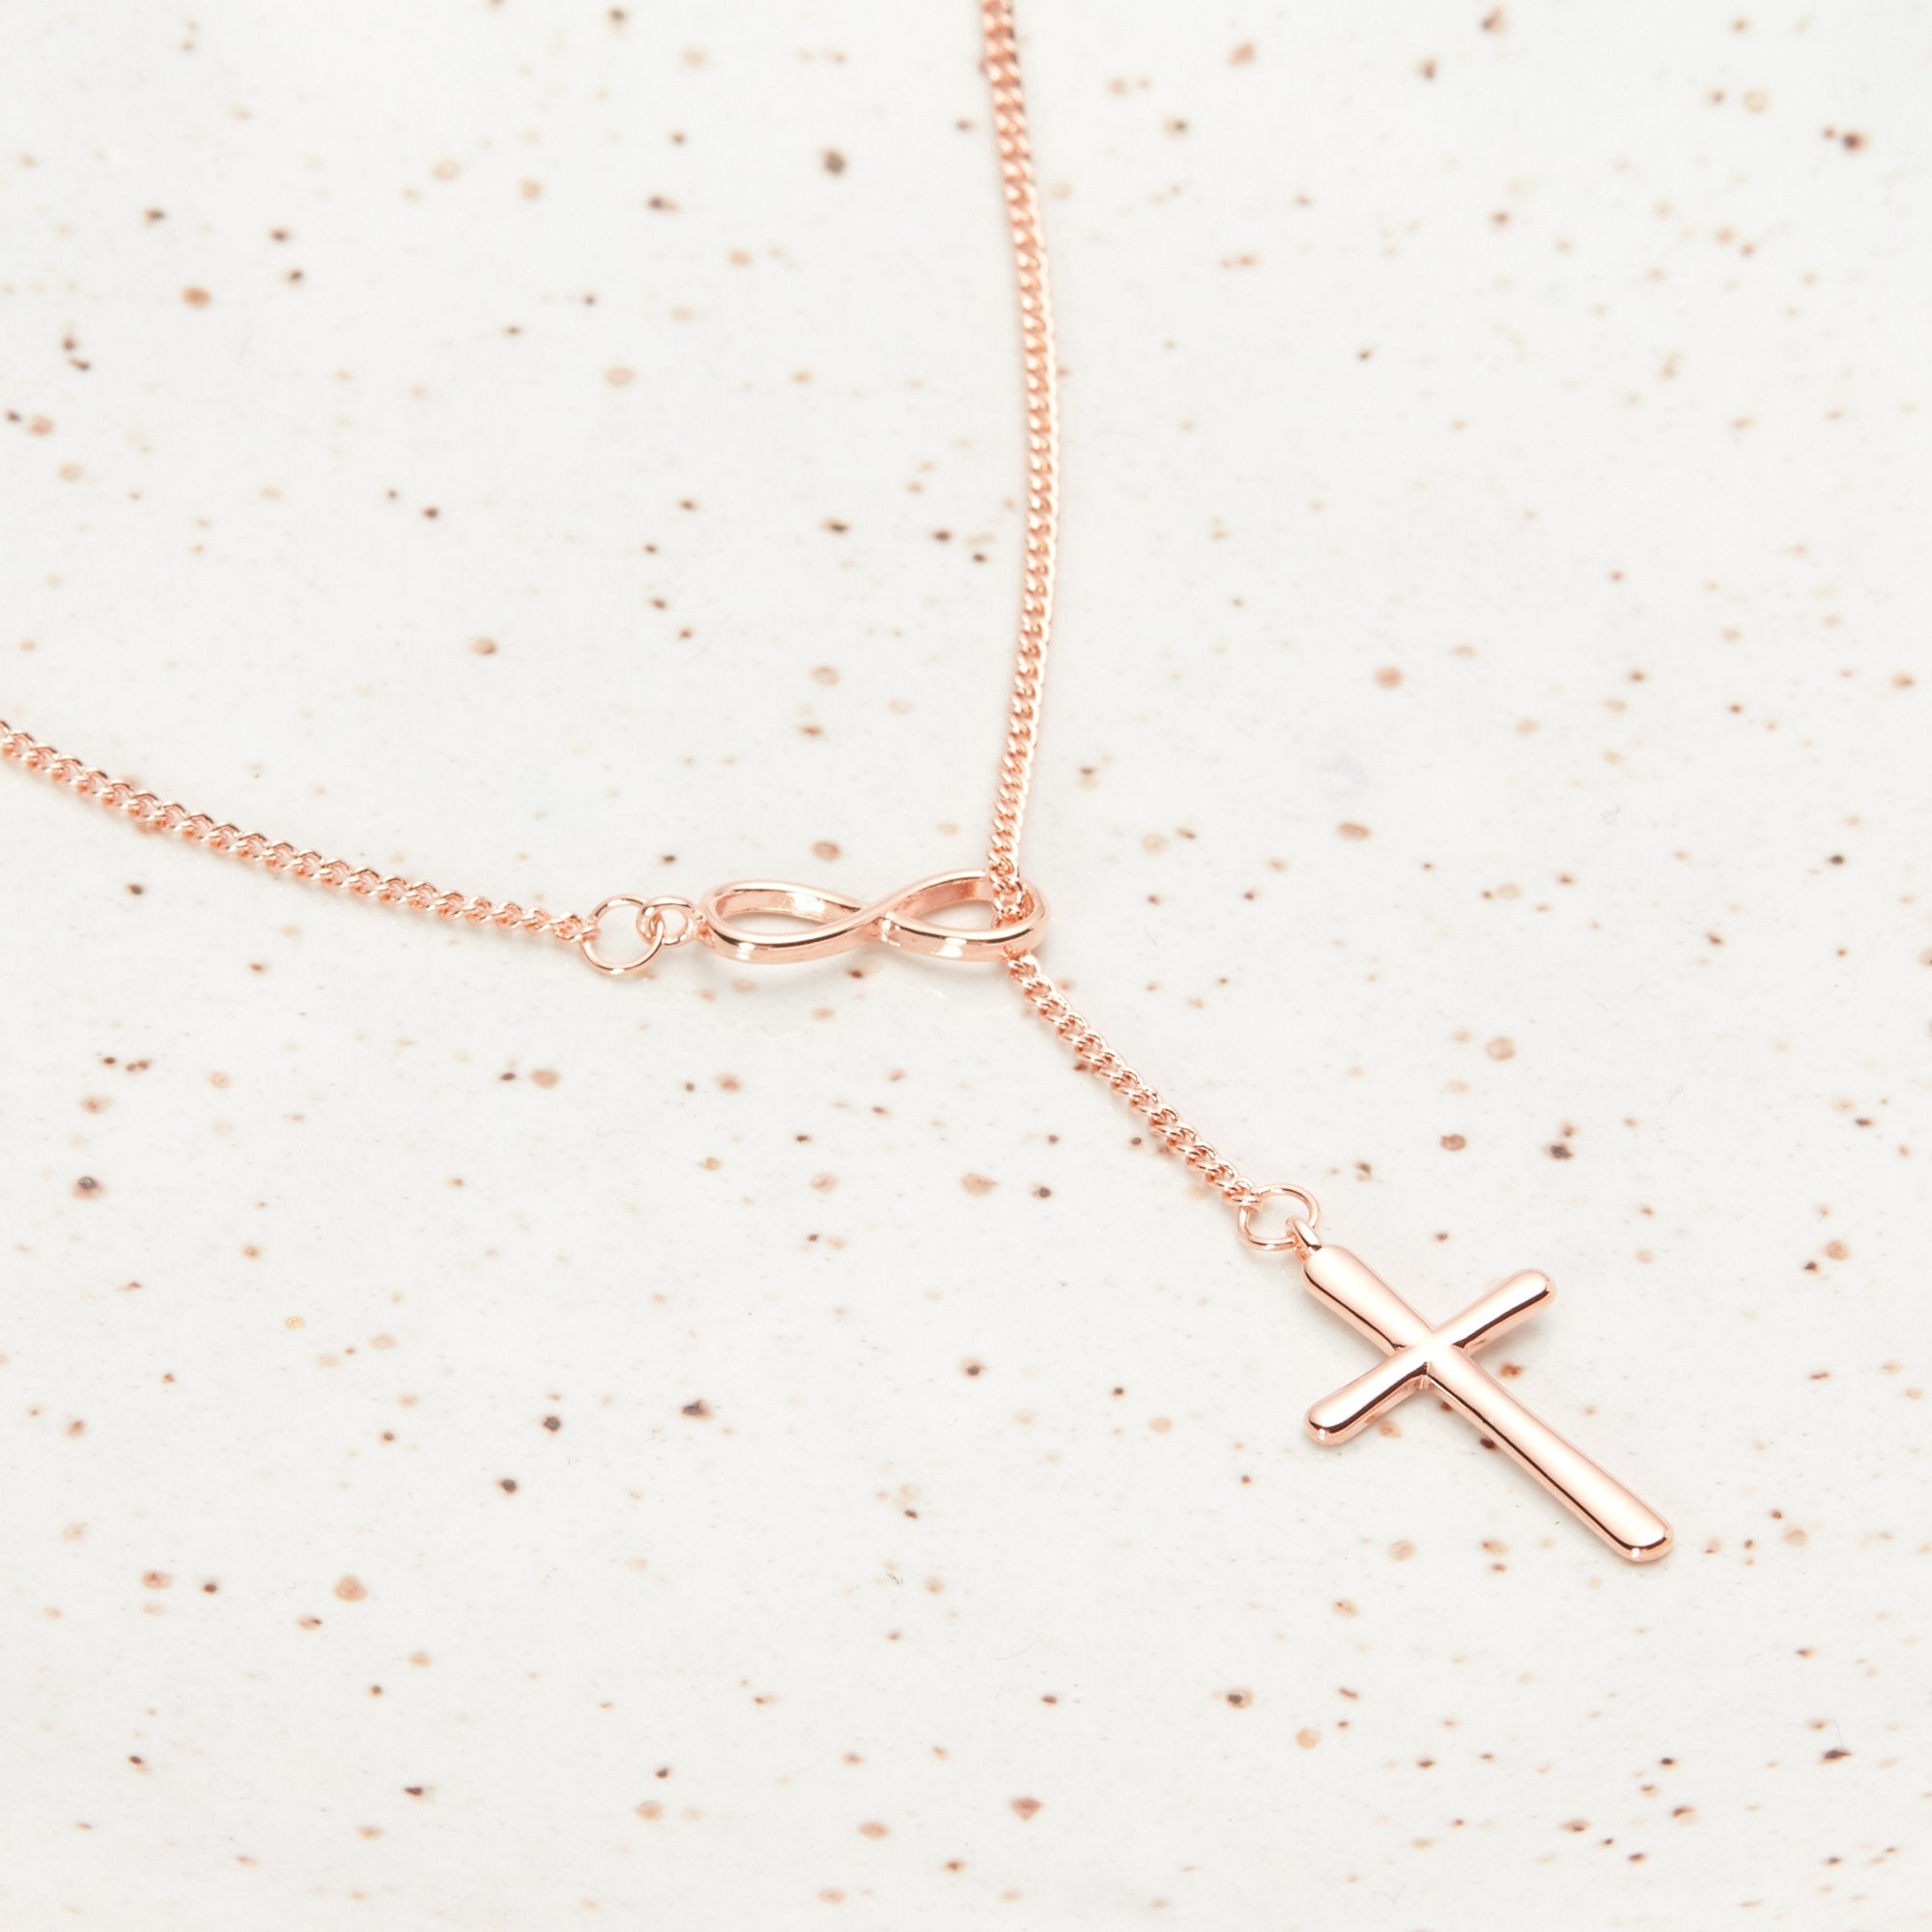 Personalised Plain Thick Cross Pendant Necklace, Solid 925 Sterling Silver,  Free Engraving Service, Man, Woman, Kid, Children, Friend, Father, Mum,  Christmas Gift, Birthday - KIMNKIM D7-3 : Amazon.co.uk: Handmade Products